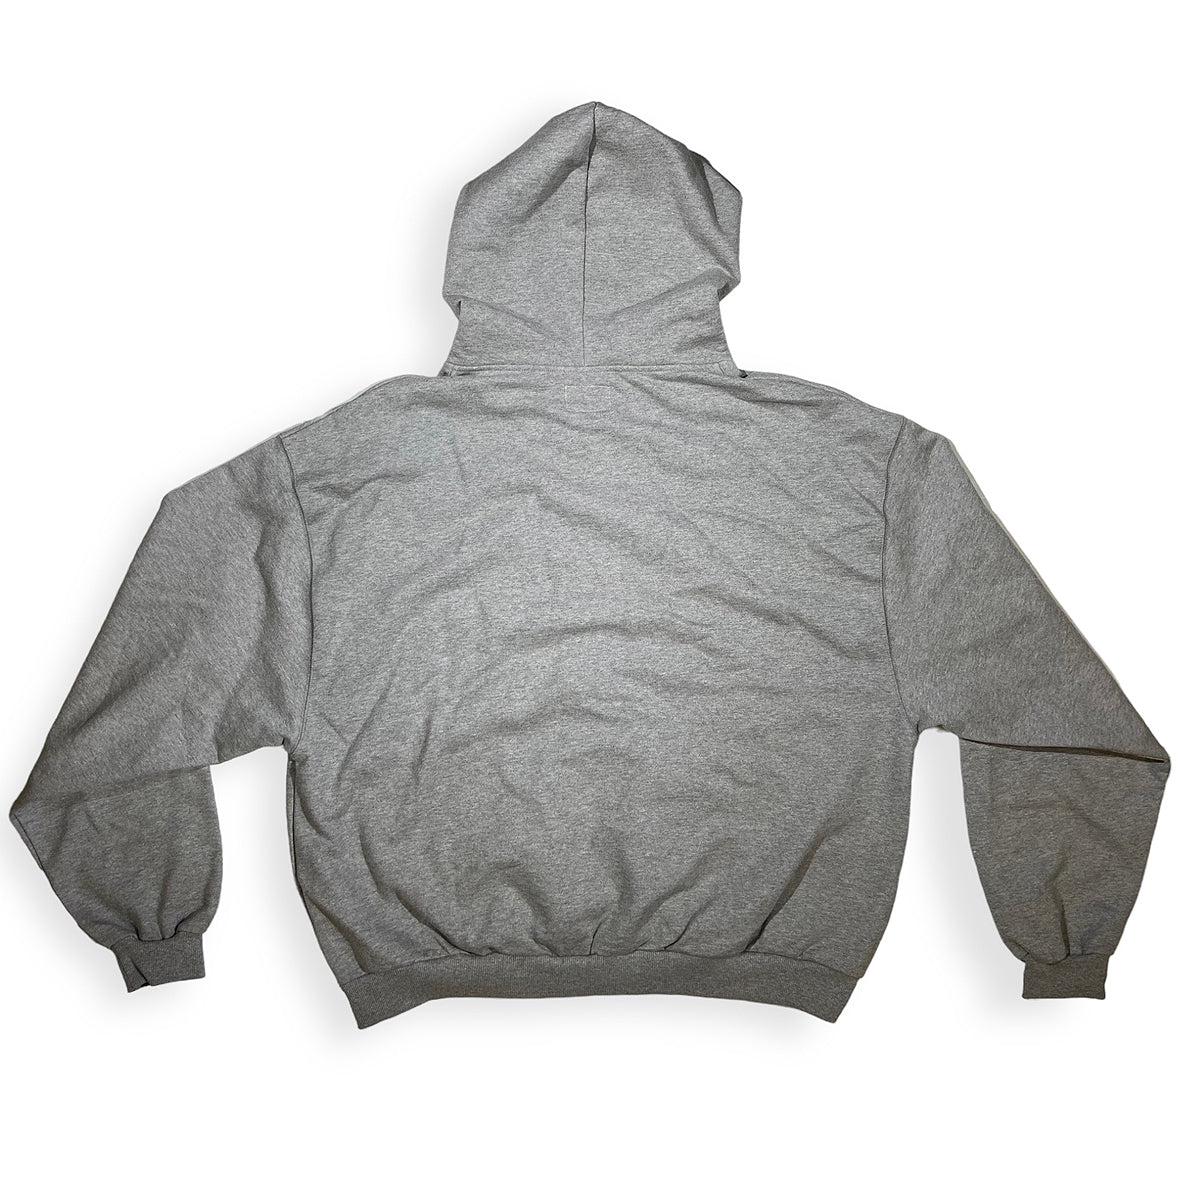 32oz Ultra-HEAVYWEIGHT Hoodie Full Zip - 100% Cotton HEATHER GREY French Terry